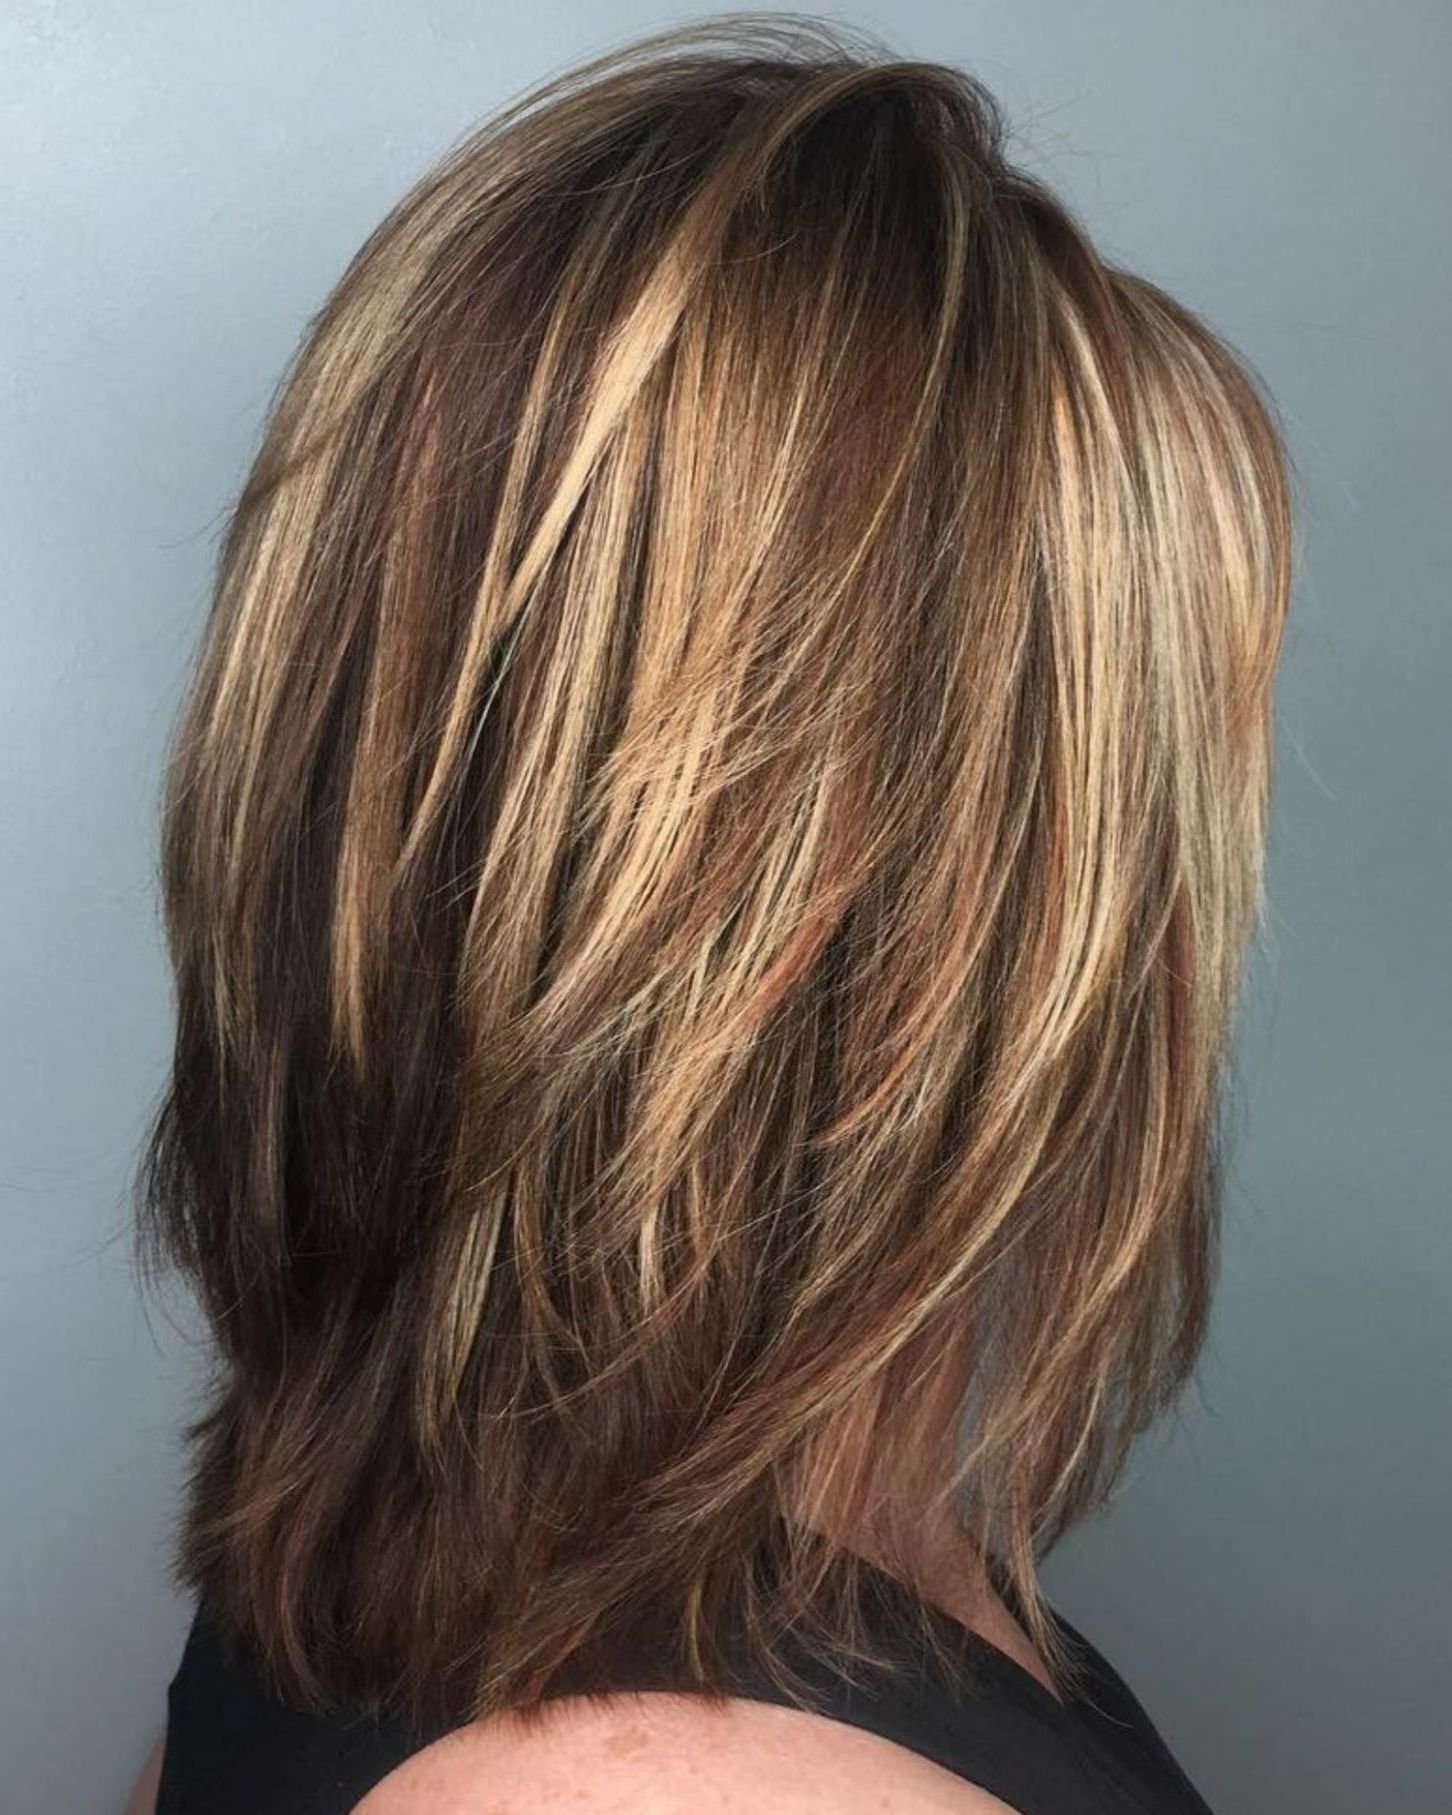 70 Brightest Medium Layered Haircuts To Light You Up (View 3 of 20)